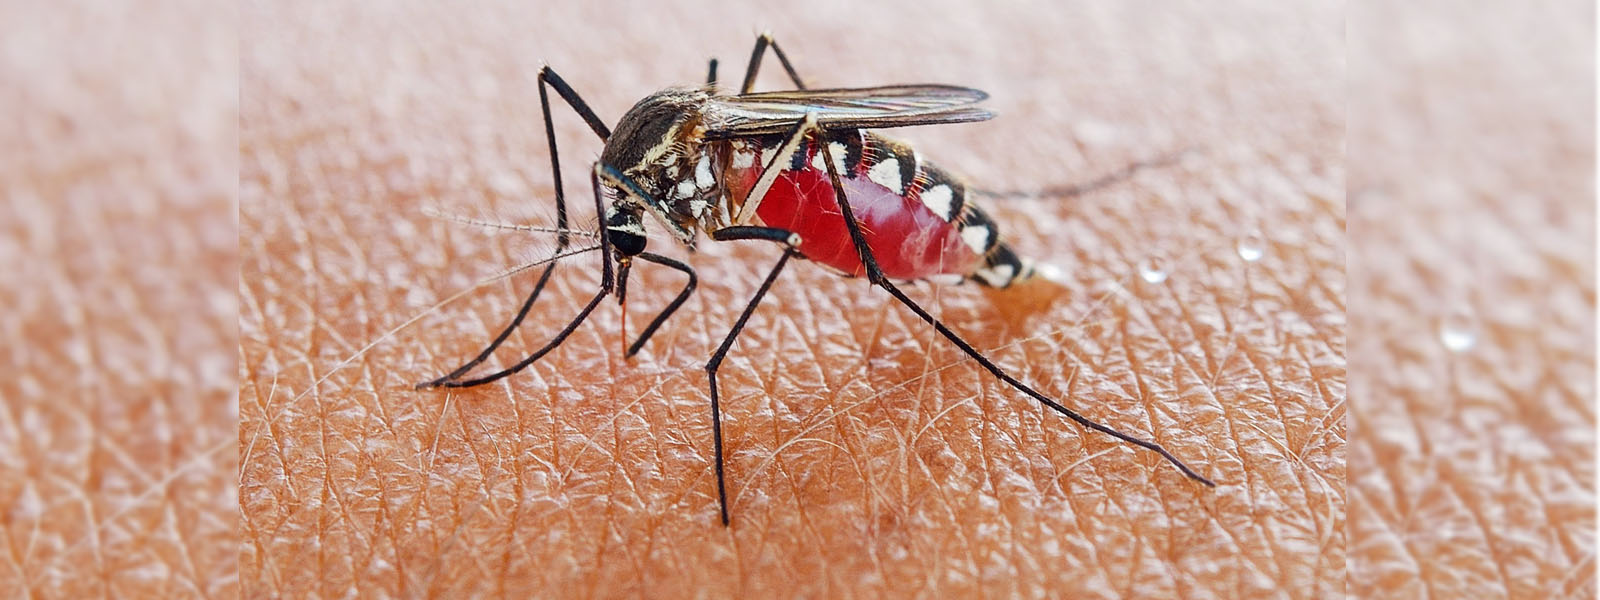 18 malaria patients identified in 2019